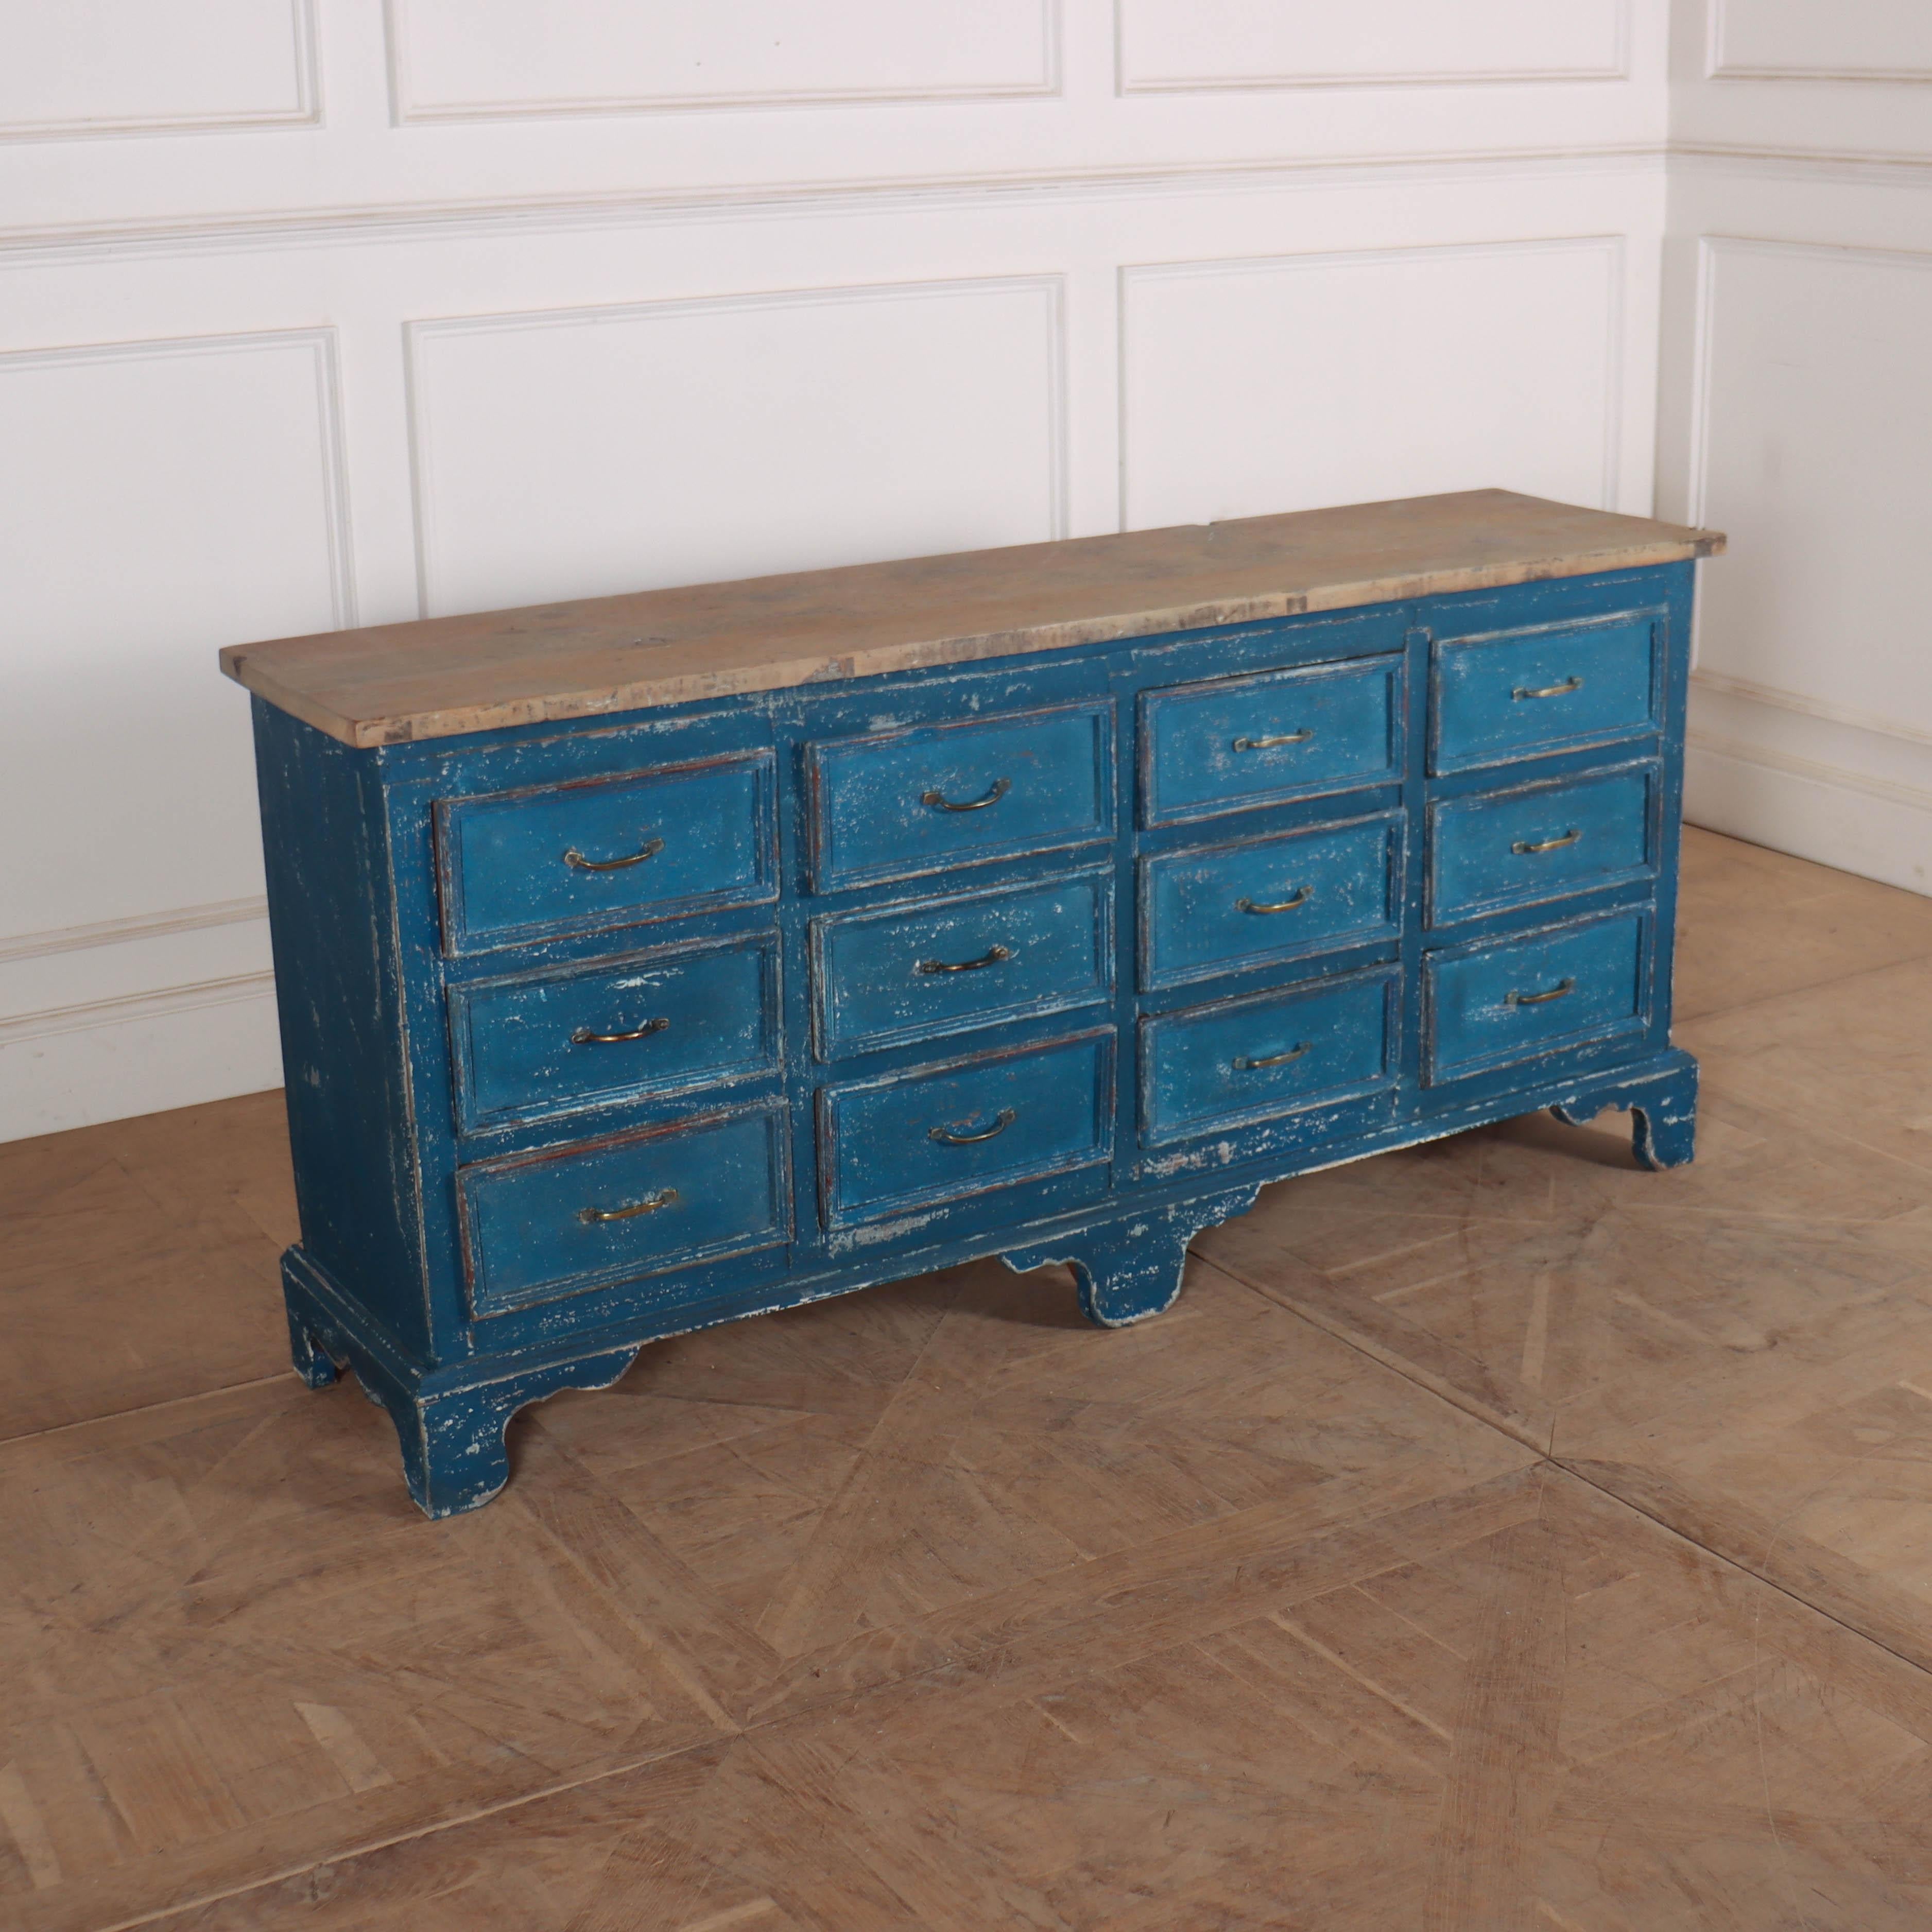 Good late 19th C English painted pine base of 12 drawers from a haberdashery shop. 1890.

Dimensions
67 inches (170 cms) Wide
17 inches (43 cms) Deep
32 inches (81 cms) High.